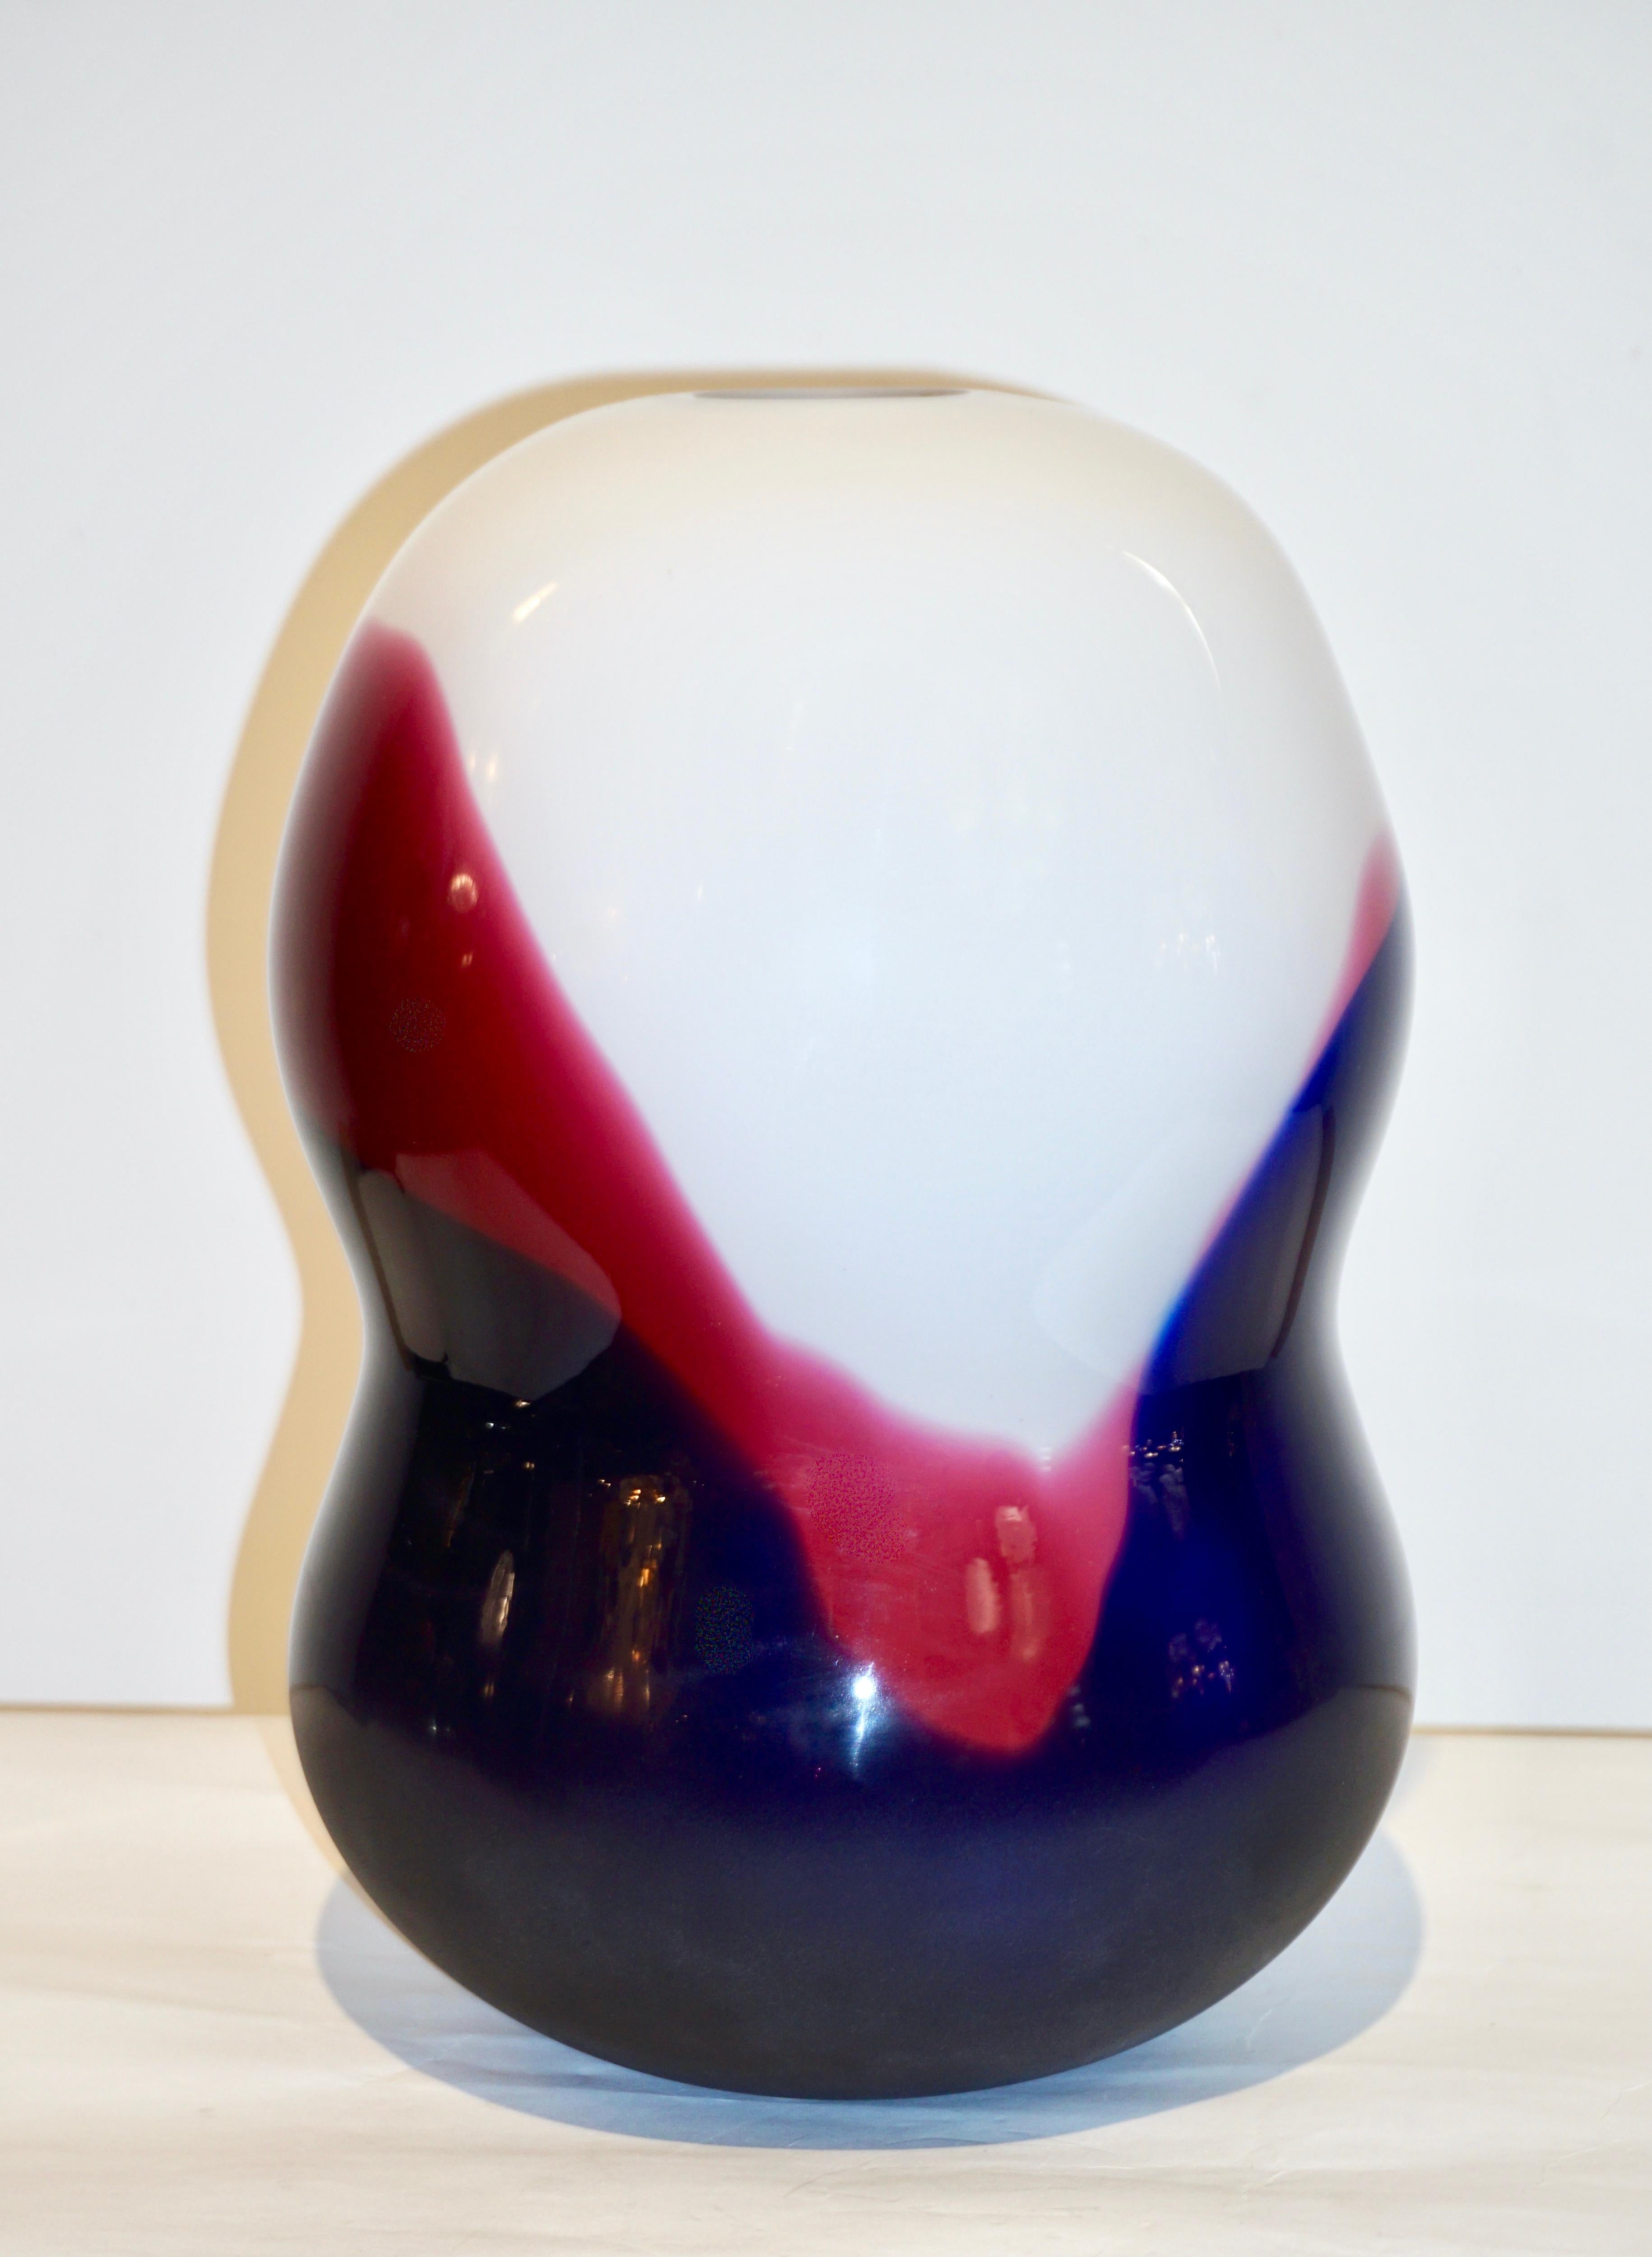 Blown Murano Art glass signed Formia, created exclusively for Roche Bobois Paris. The very modern minimalist design and execution are striking in the luxurious quality of glass, that resembles enamel, multi layers of glass on ivory white body